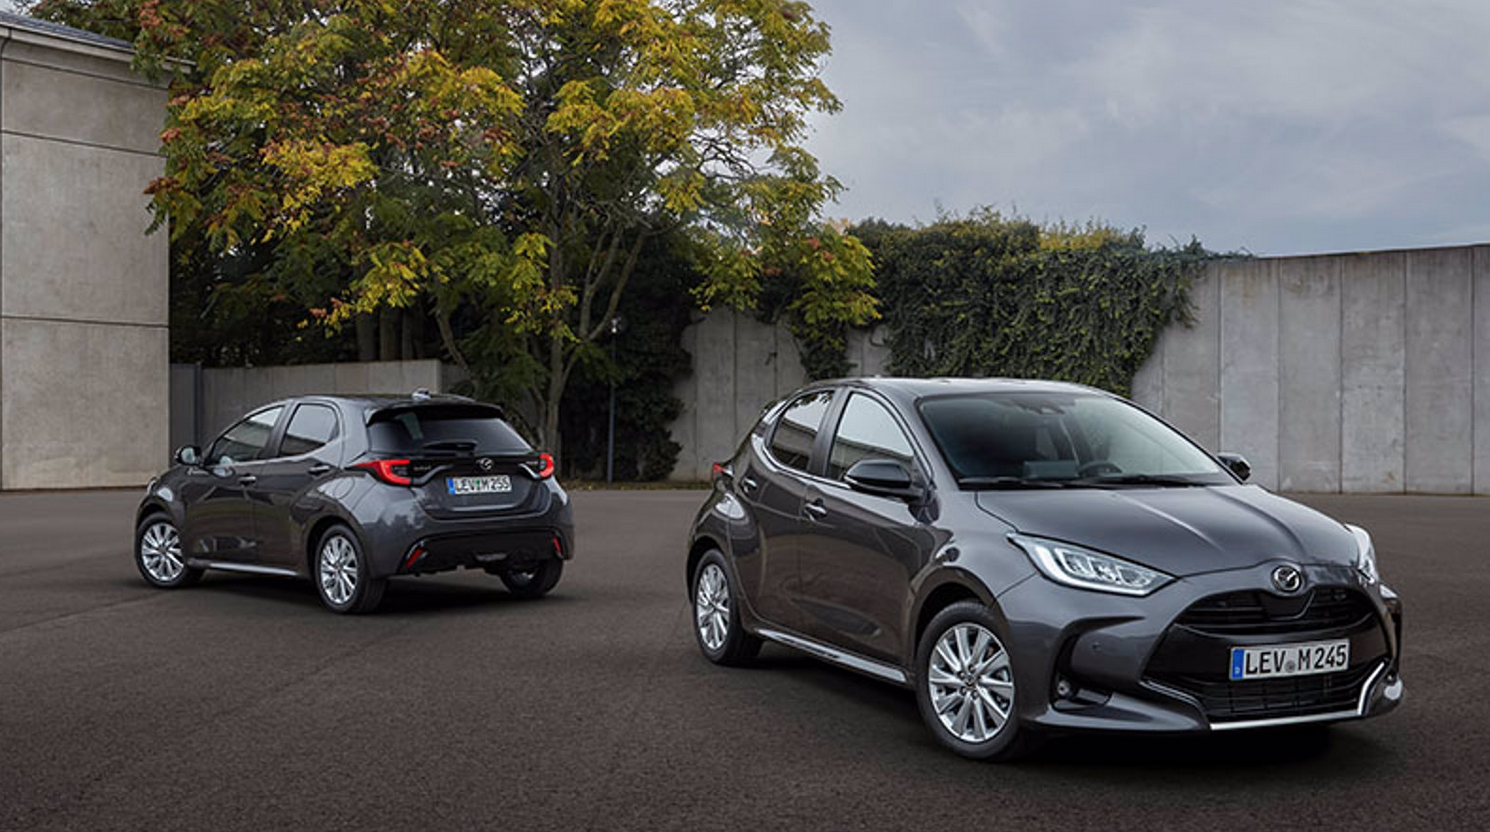 Mazda 2 Hybrid is the brand’s first self-charging hybrid